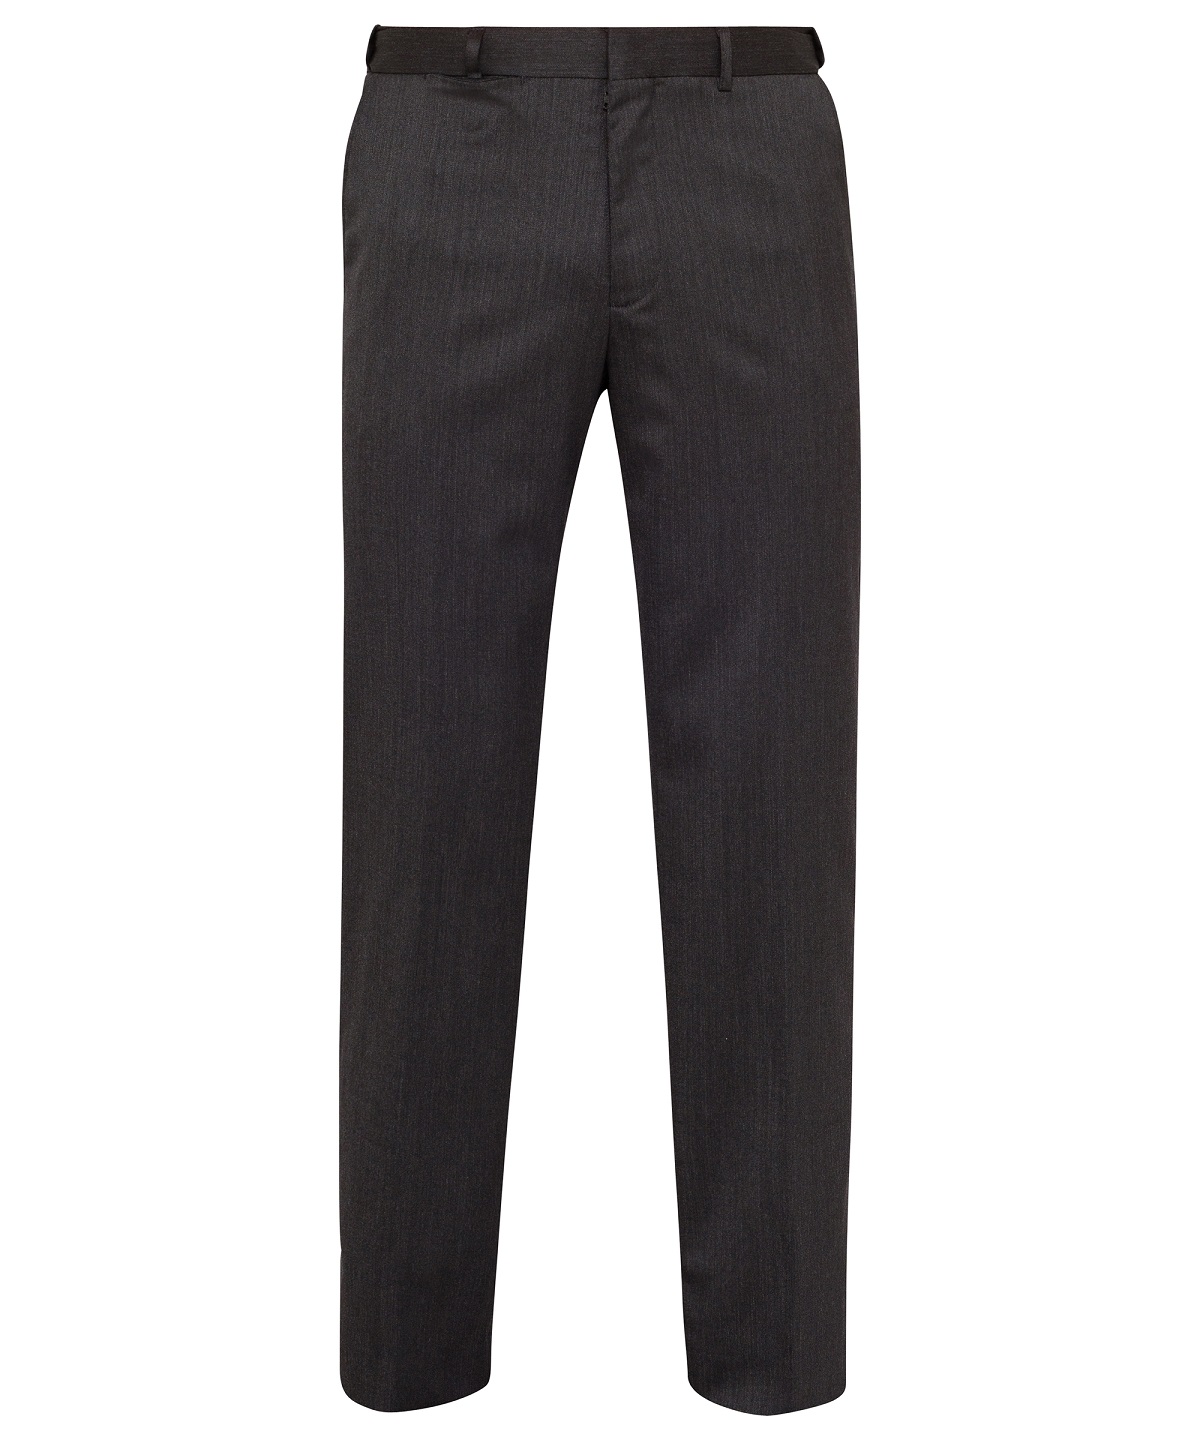 Black Pants for Business | Mens Pants by Bracks. Save up to 25%